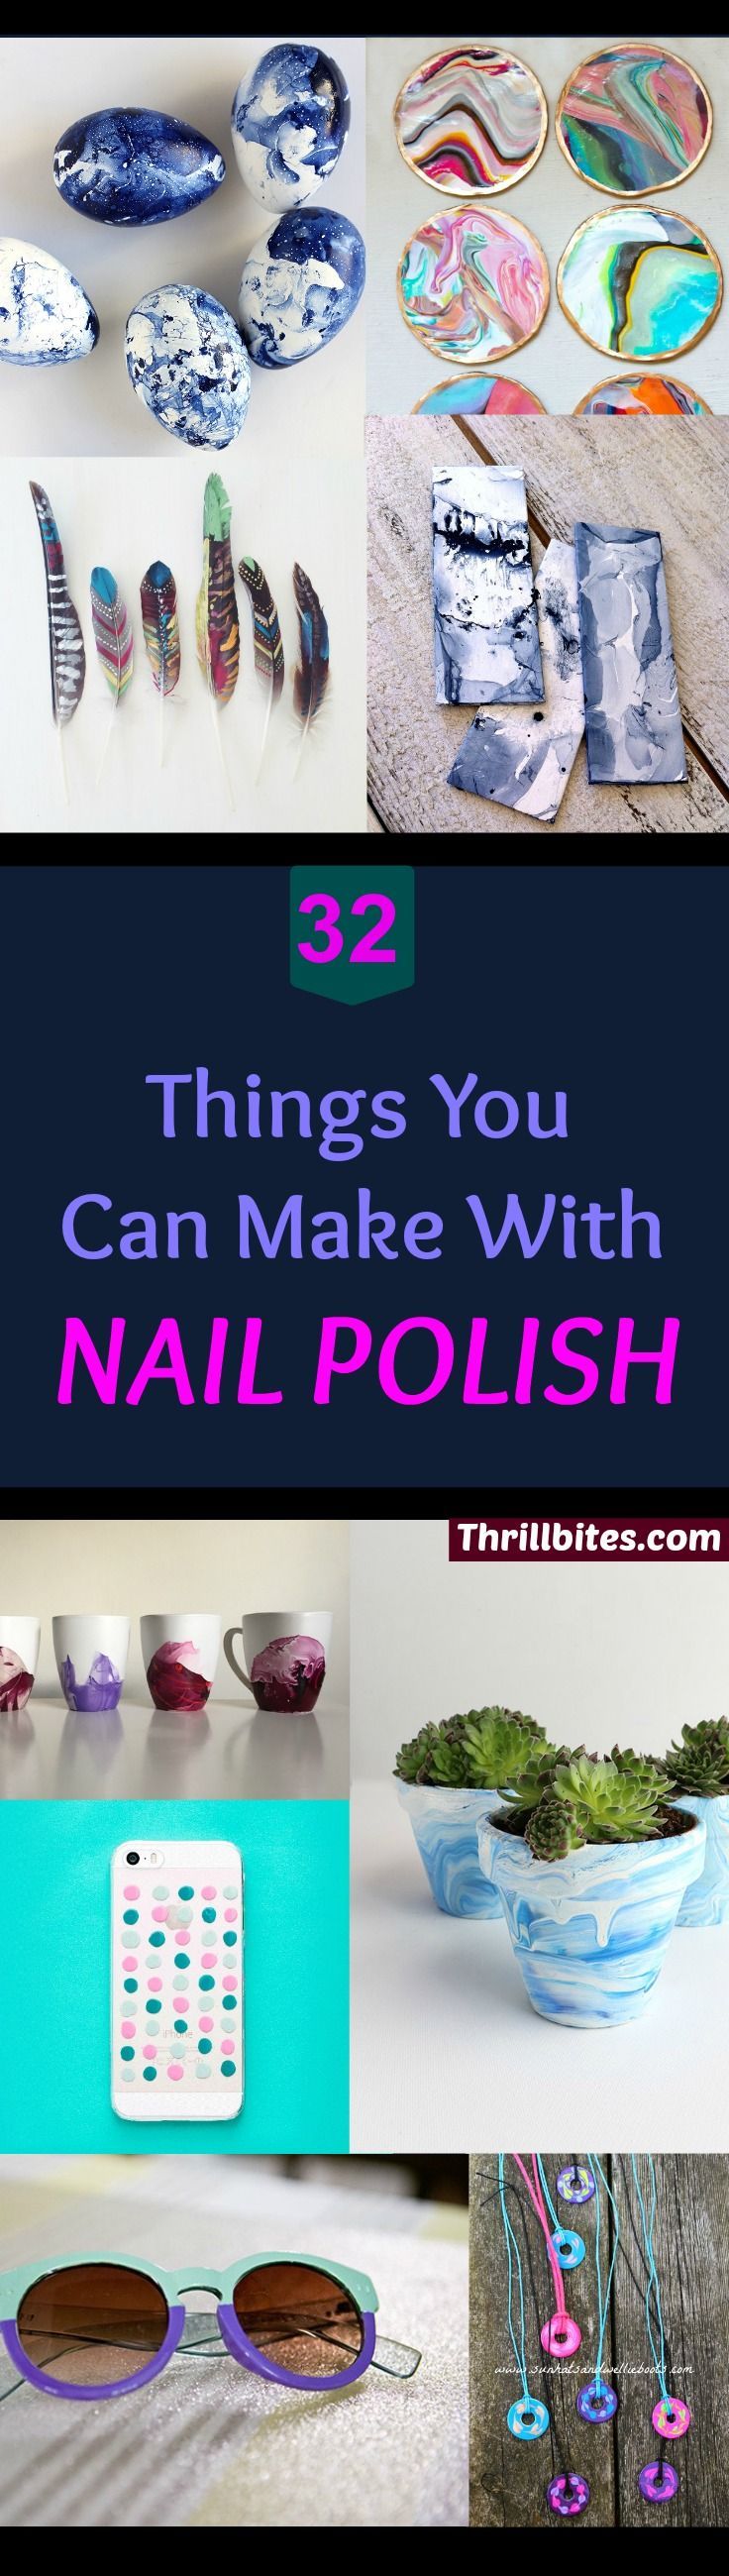 32 Amazing Things You Can Make With Nail Polish